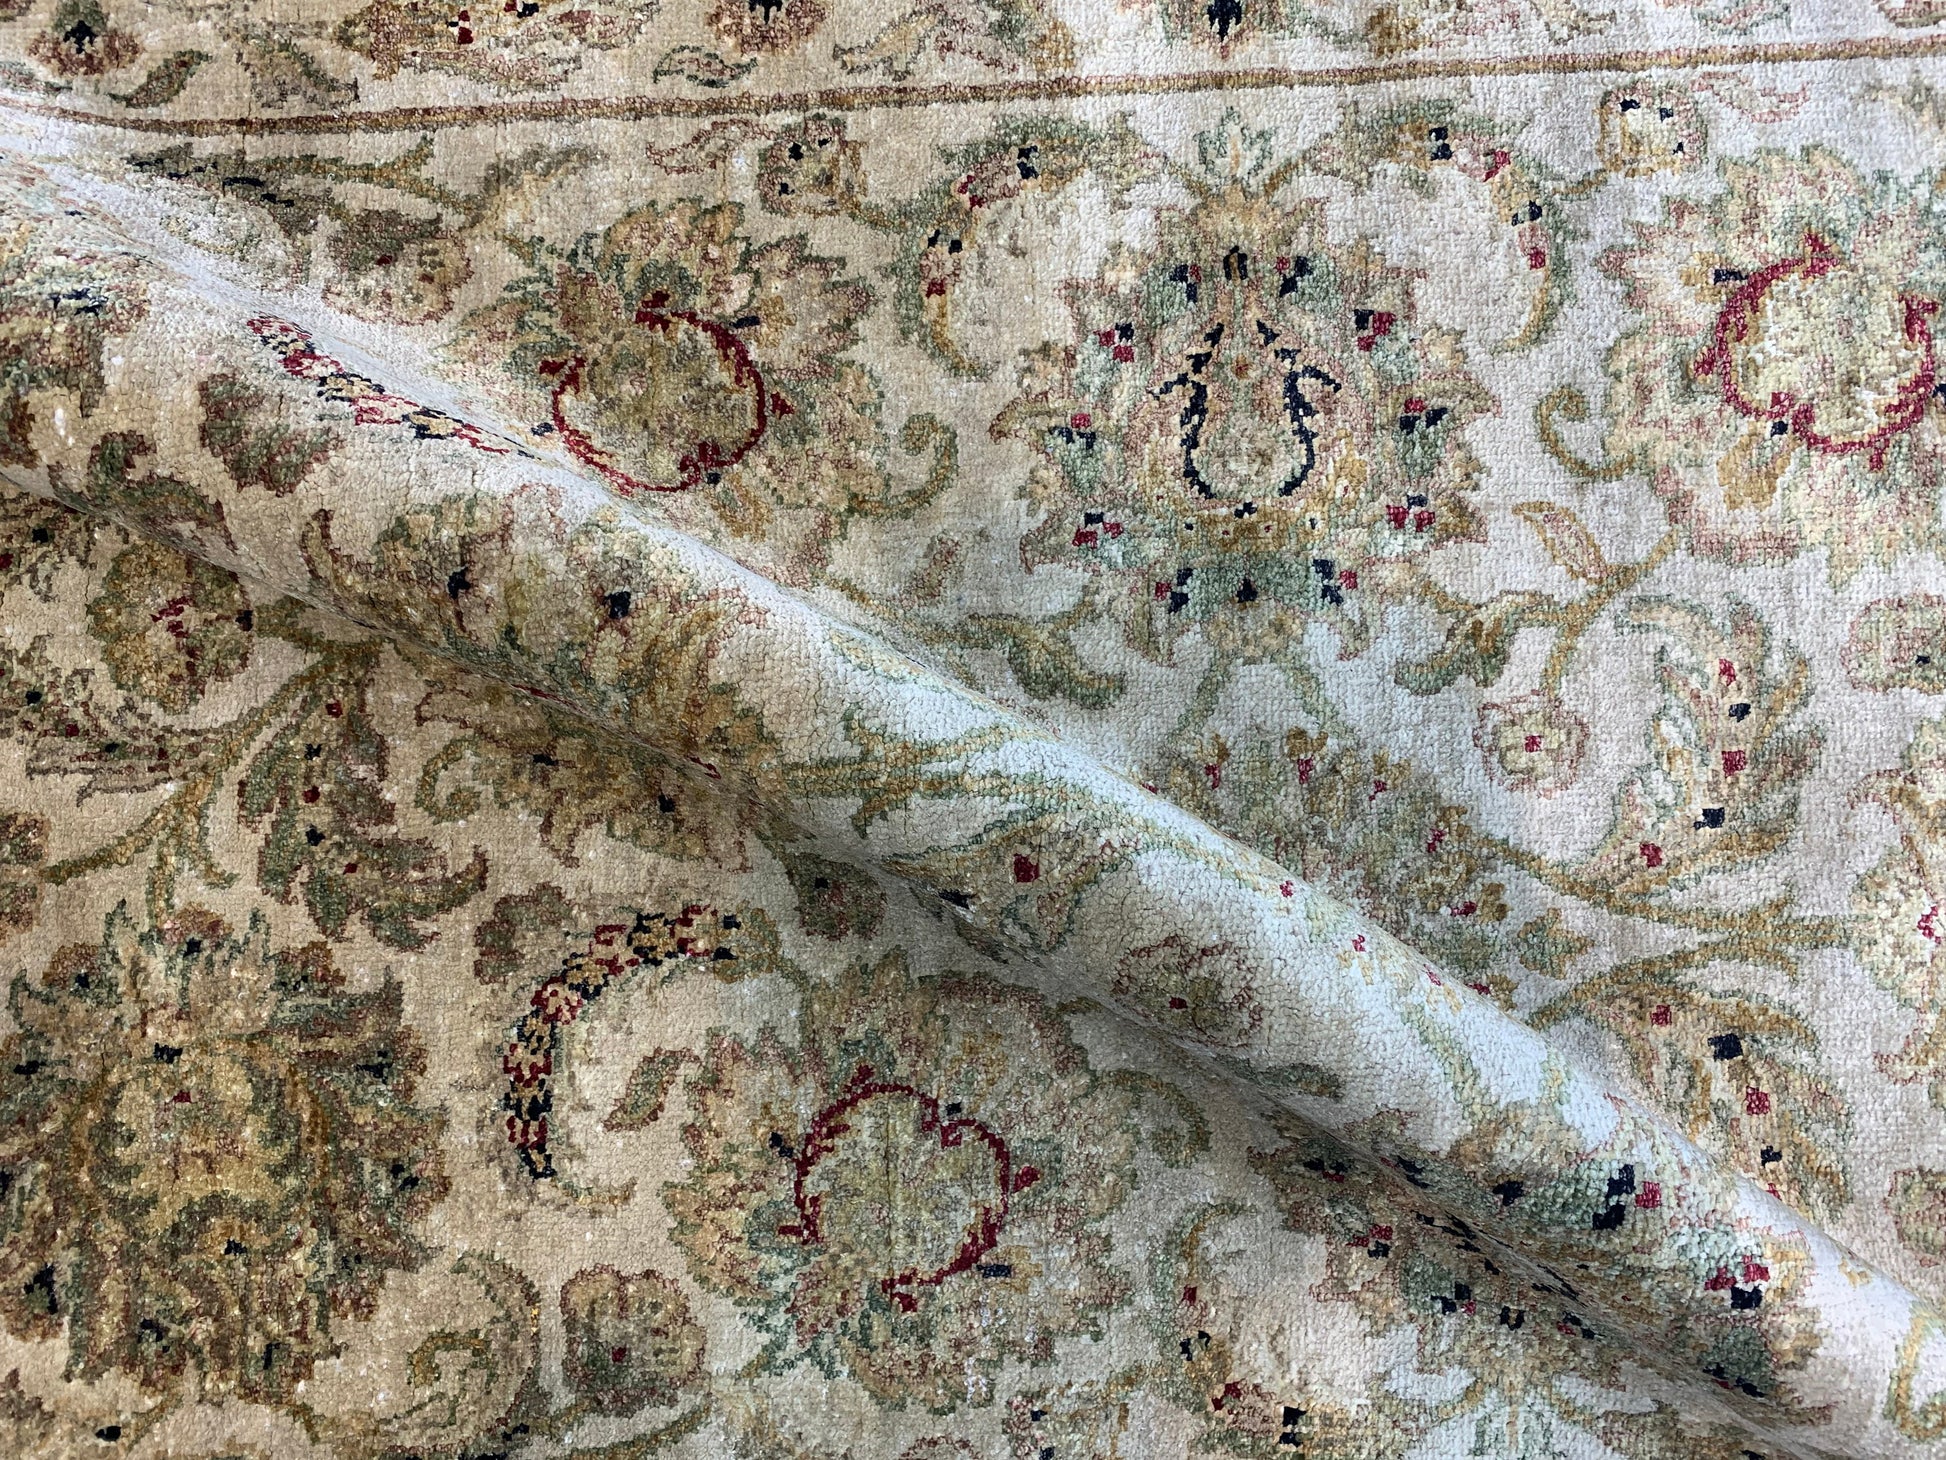 Get trendy with Ivory Multi Pure Silk Contemporary Luxurious Handknotted Area Rug 3.11x6.0ft 120x182Cms - Contemporary Rugs available at Jaipur Oriental Rugs. Grab yours for $1899.00 today!